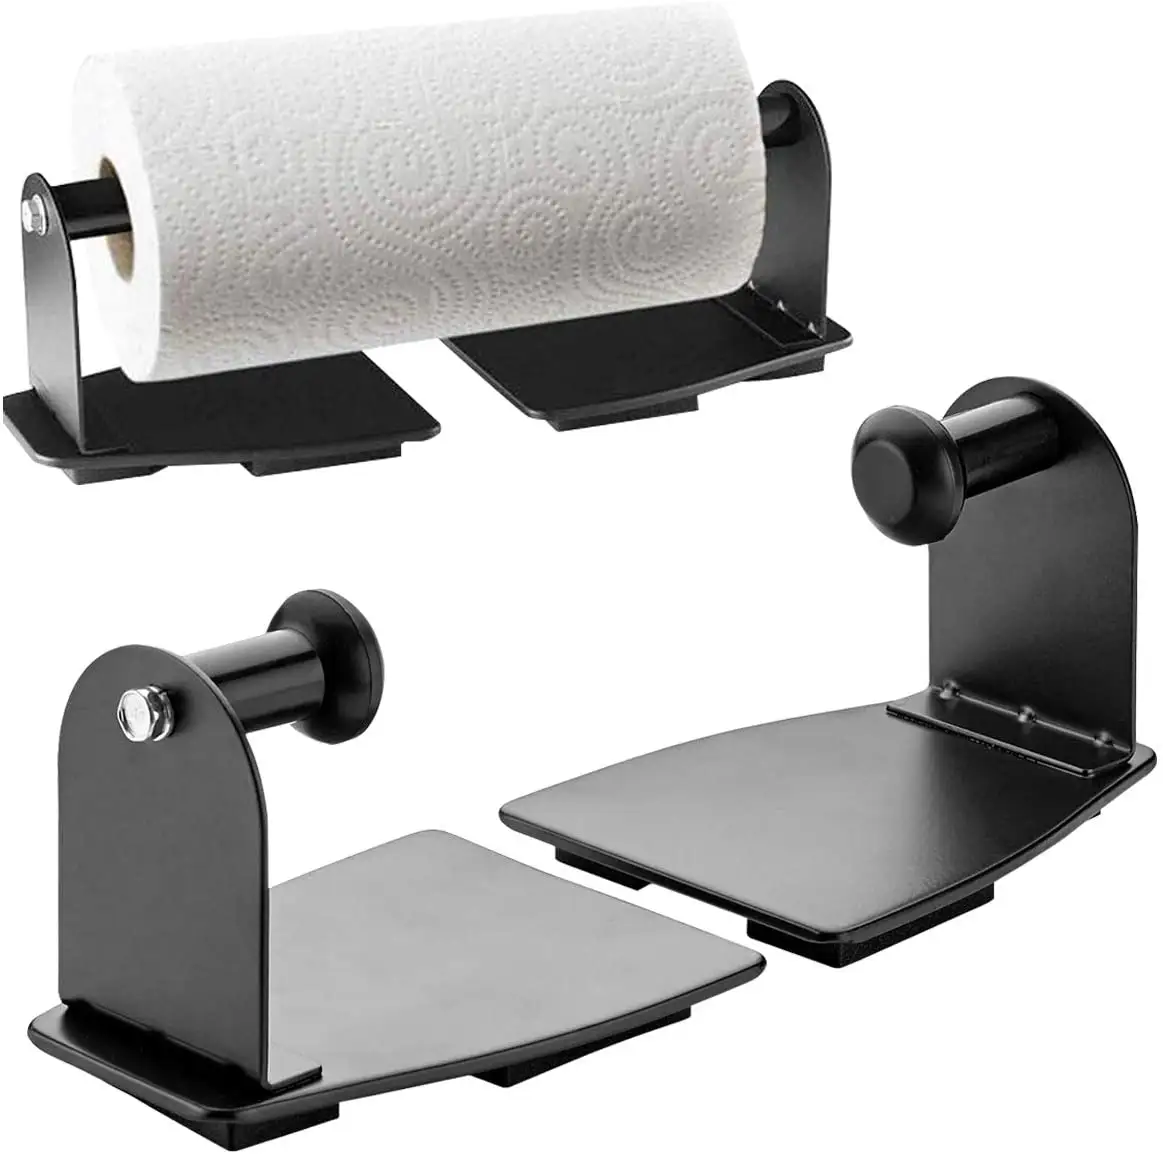 Black Magnetic Paper Towel Holder, Powerful Magnets Mount to Any Metal Surface Magnetic Paper Towel Organizer